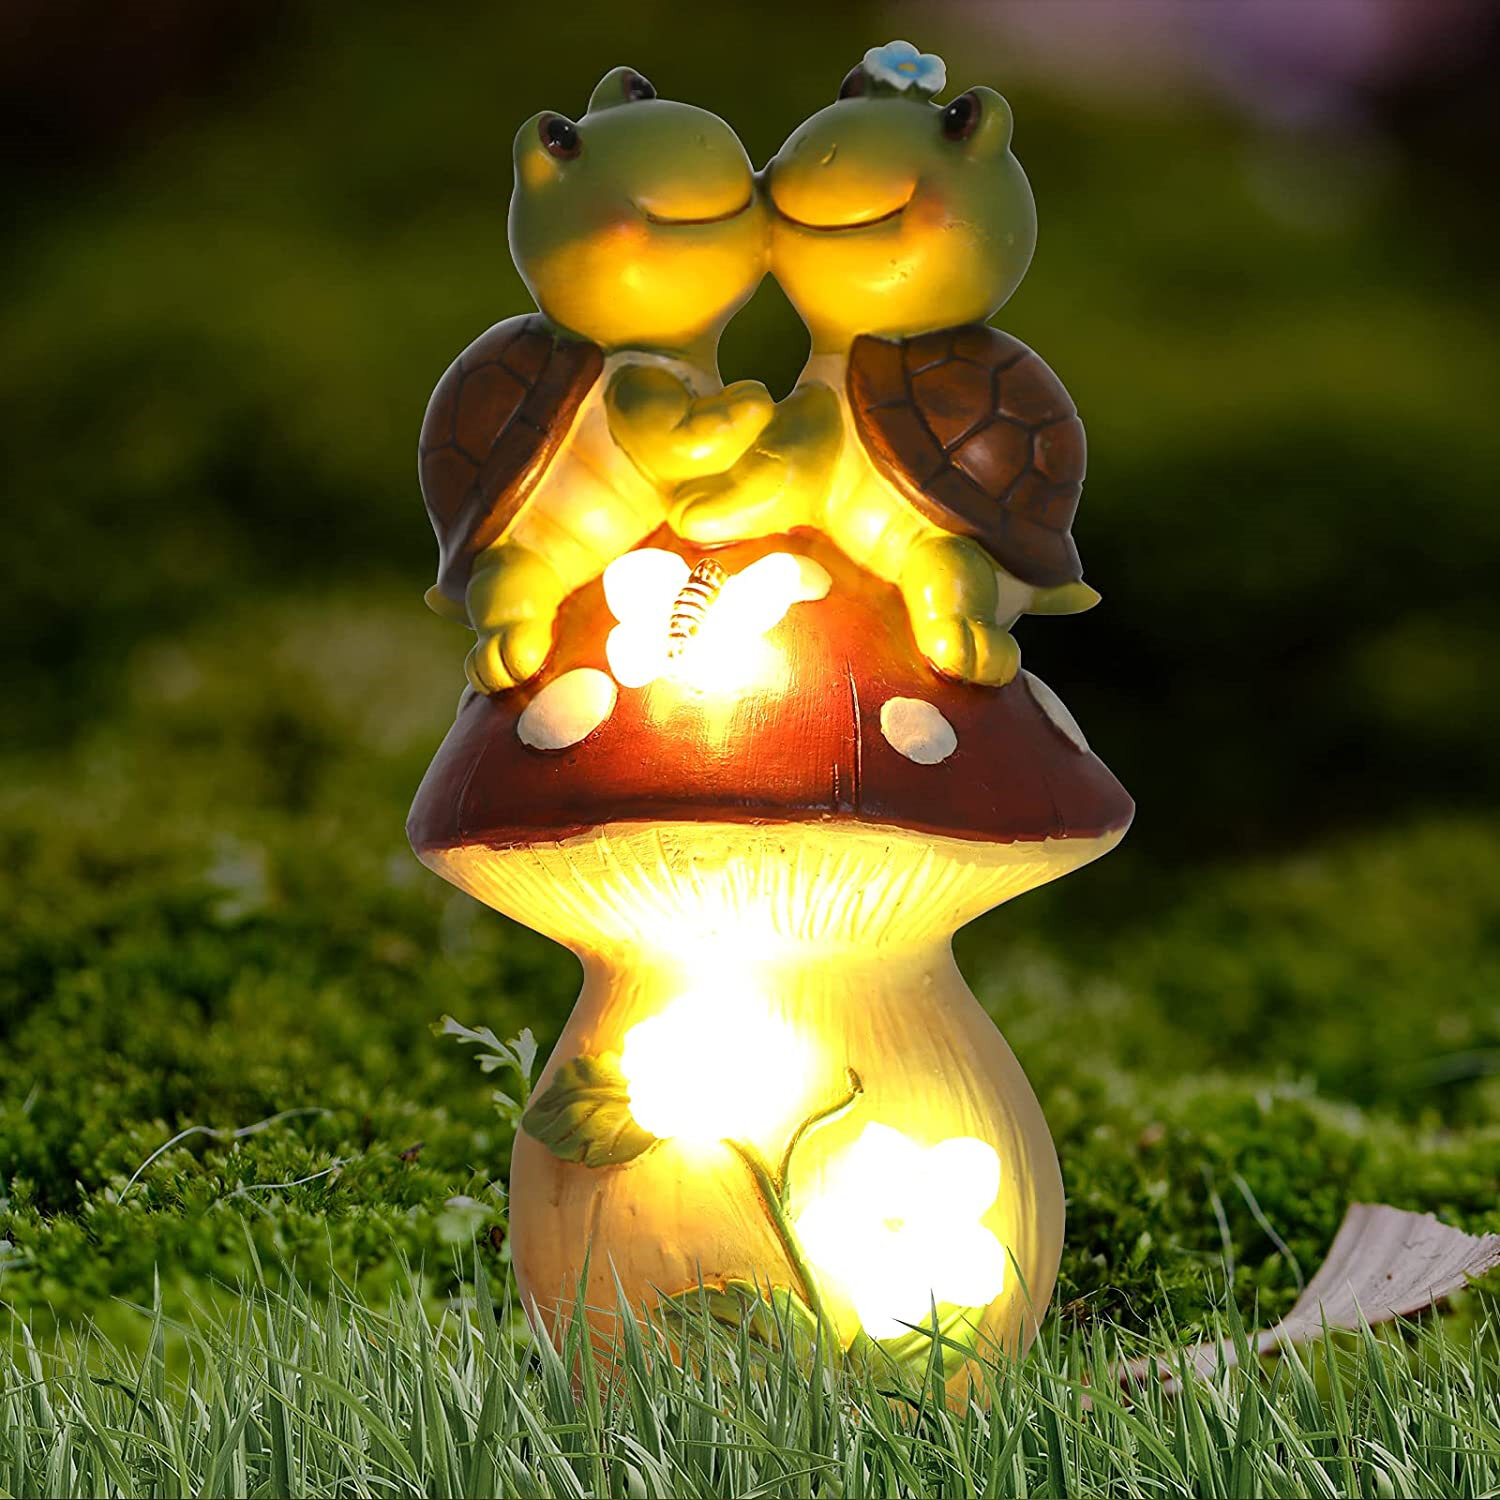 MUSHROOMS AND FLOWERS LARGE 10" OUTDOOR RESIN FIGURINE W/SOLAR LIGHT FREE SHIP 